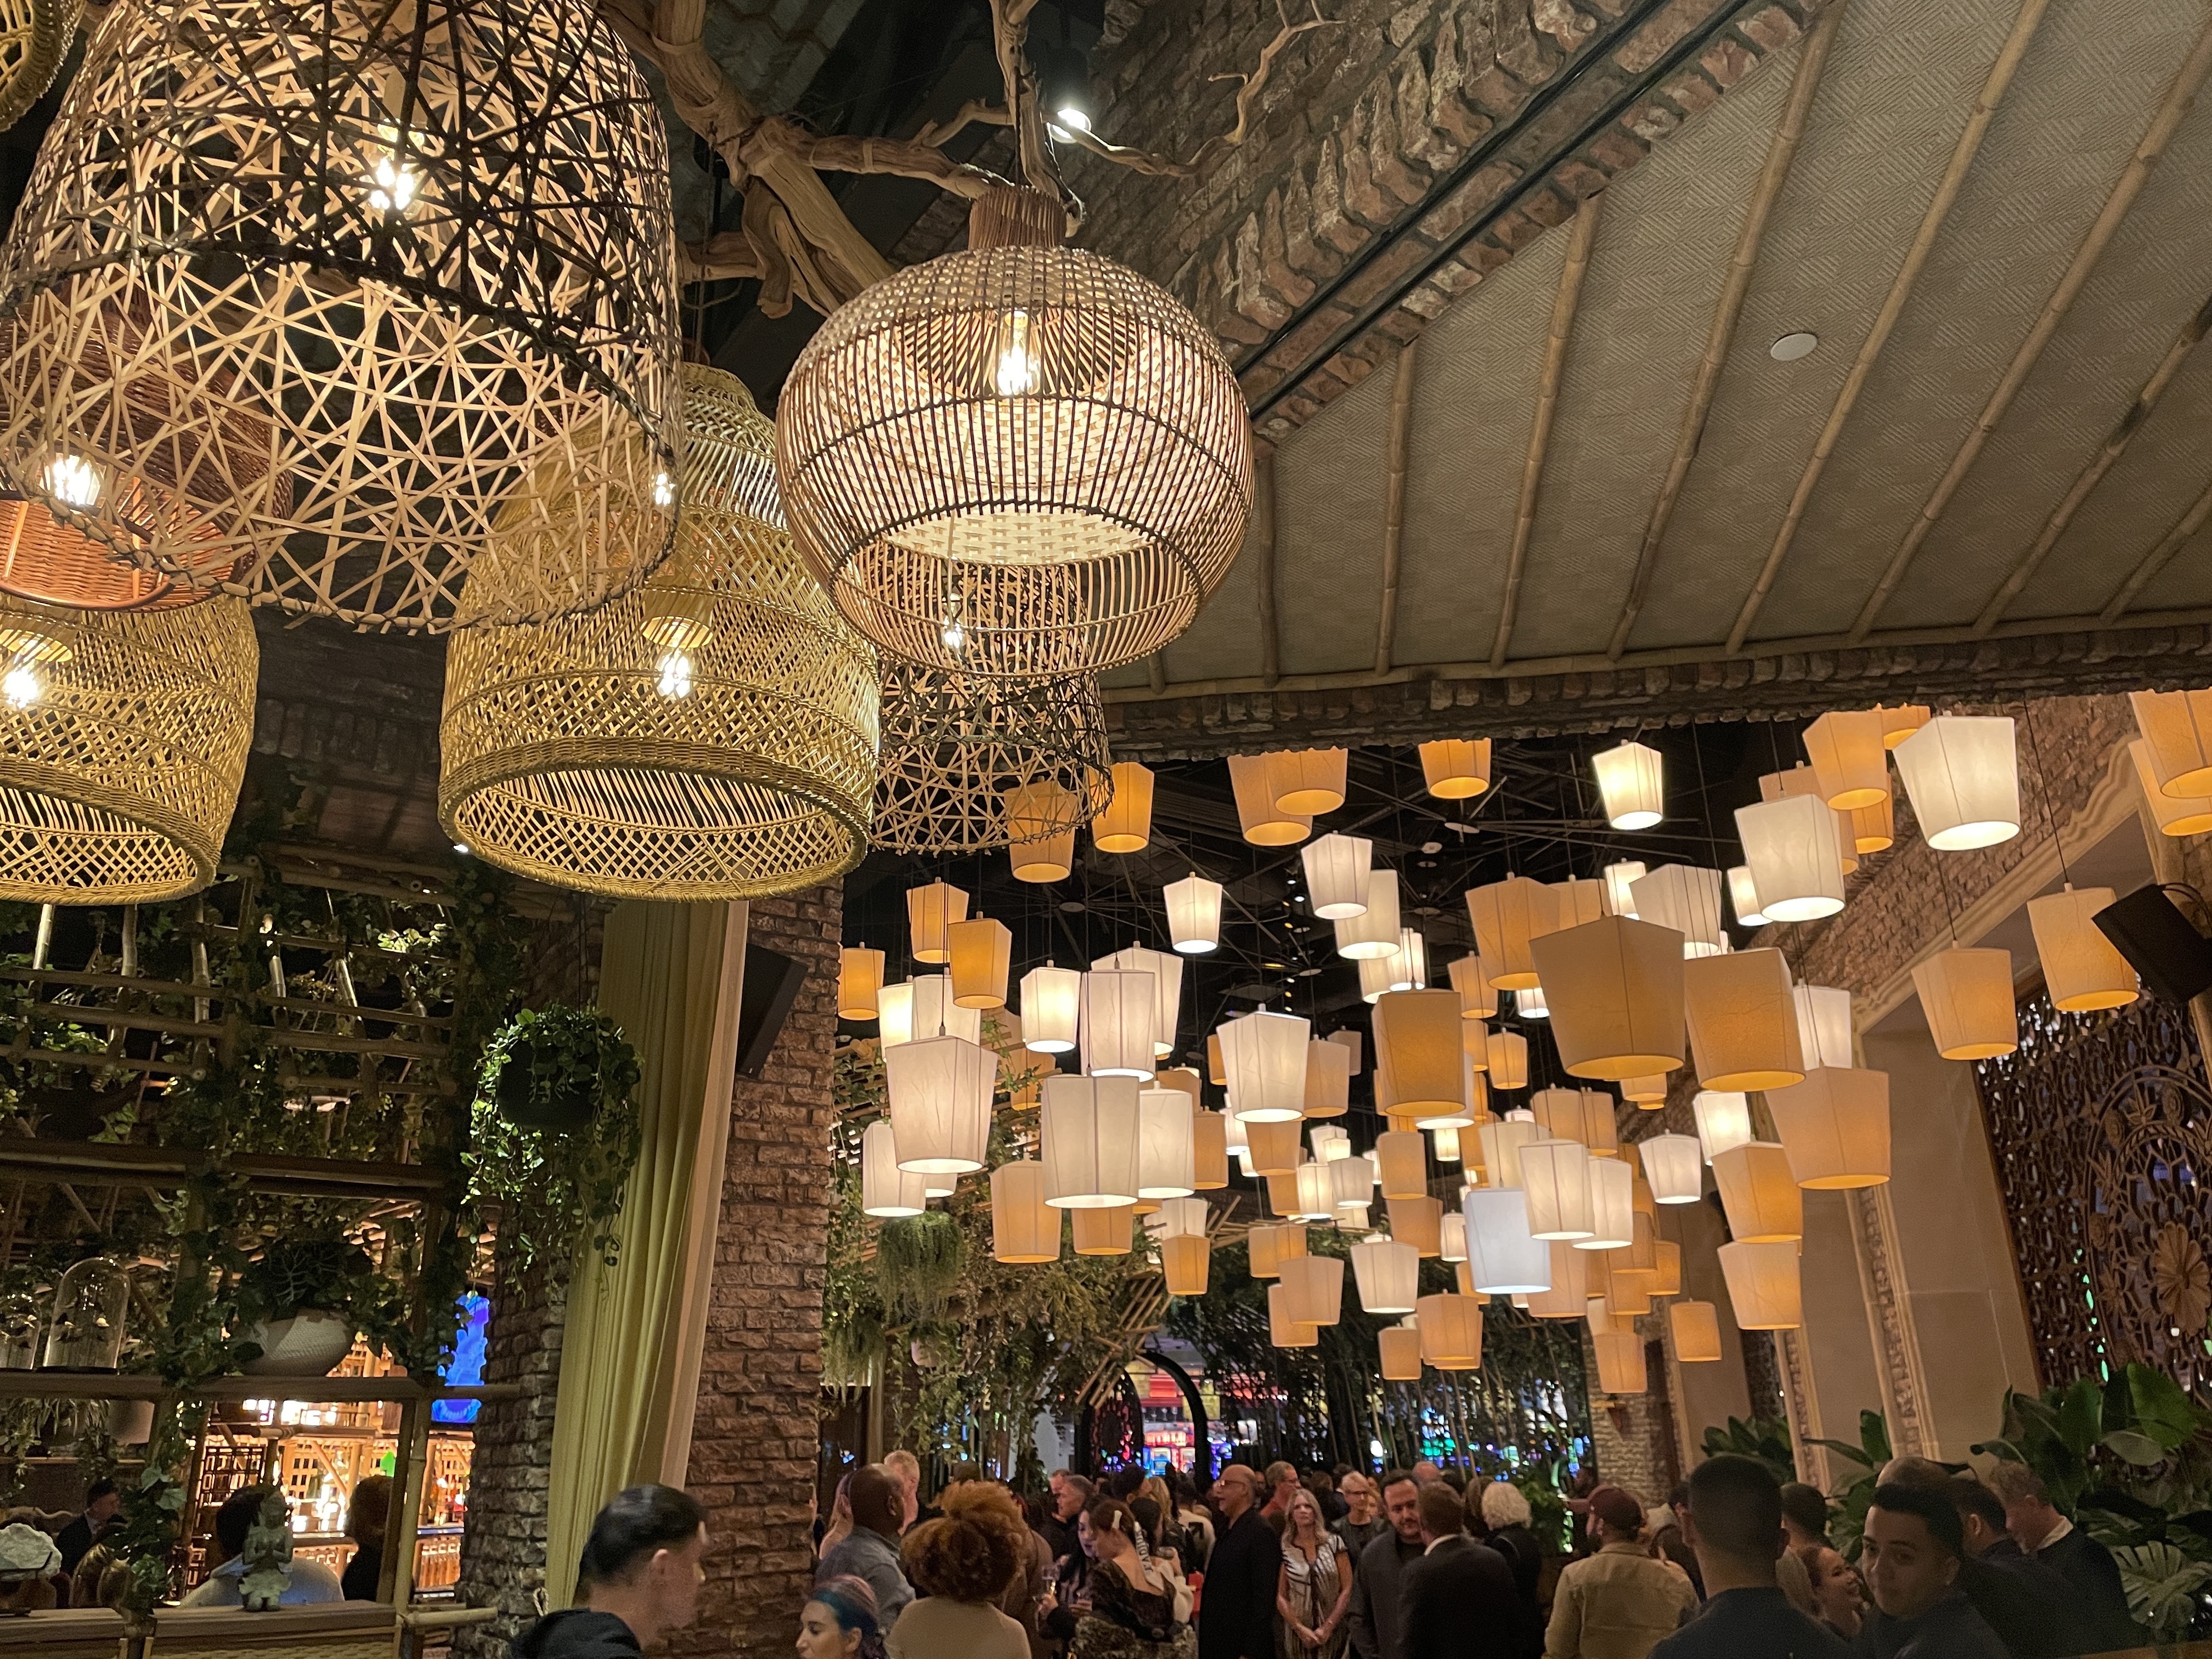 Hundreds of lanterns float above the Lotus of Siam dining room.